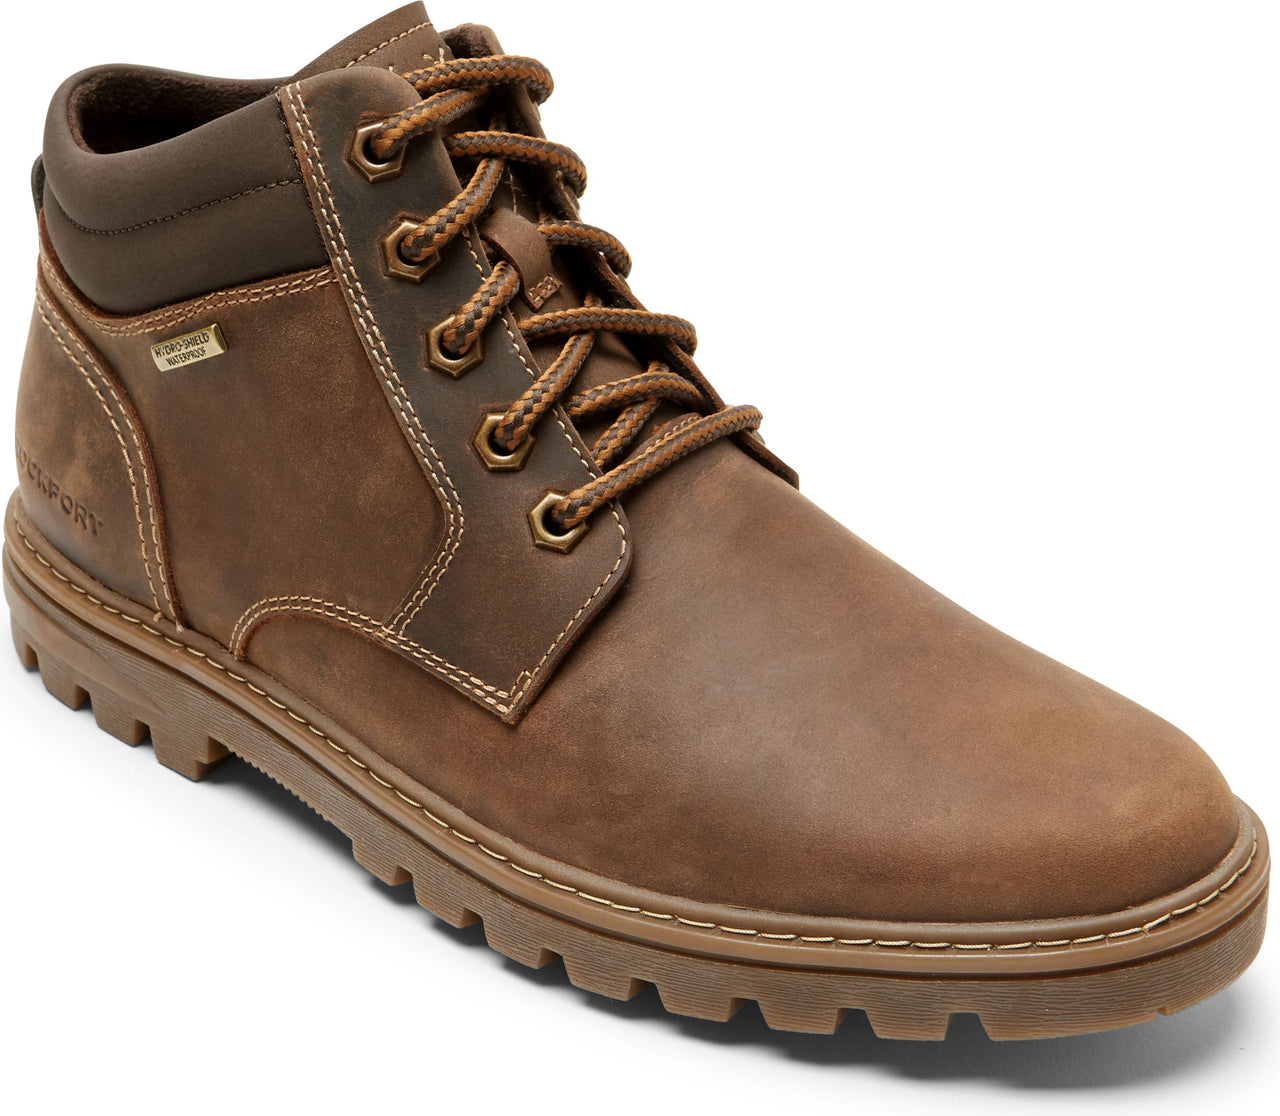 Rockport Boots Weather Or Not Plain Toe Boot New Tan